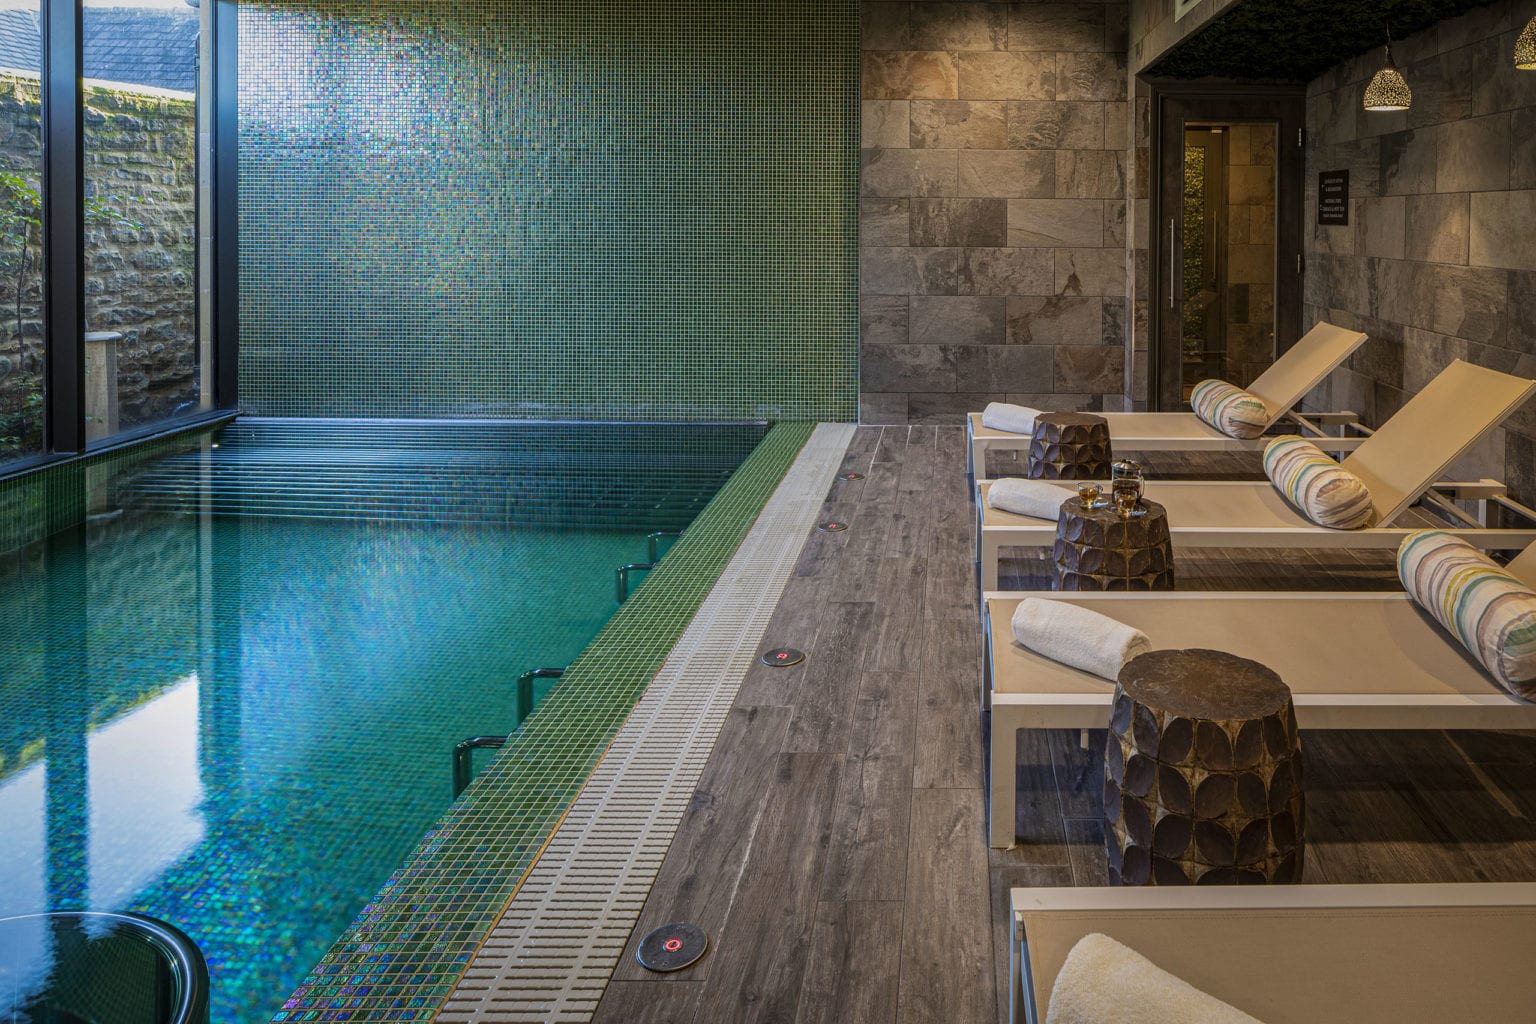 Hydrotherapy pool at Swinton Country Club and Spa in North Yorkshire